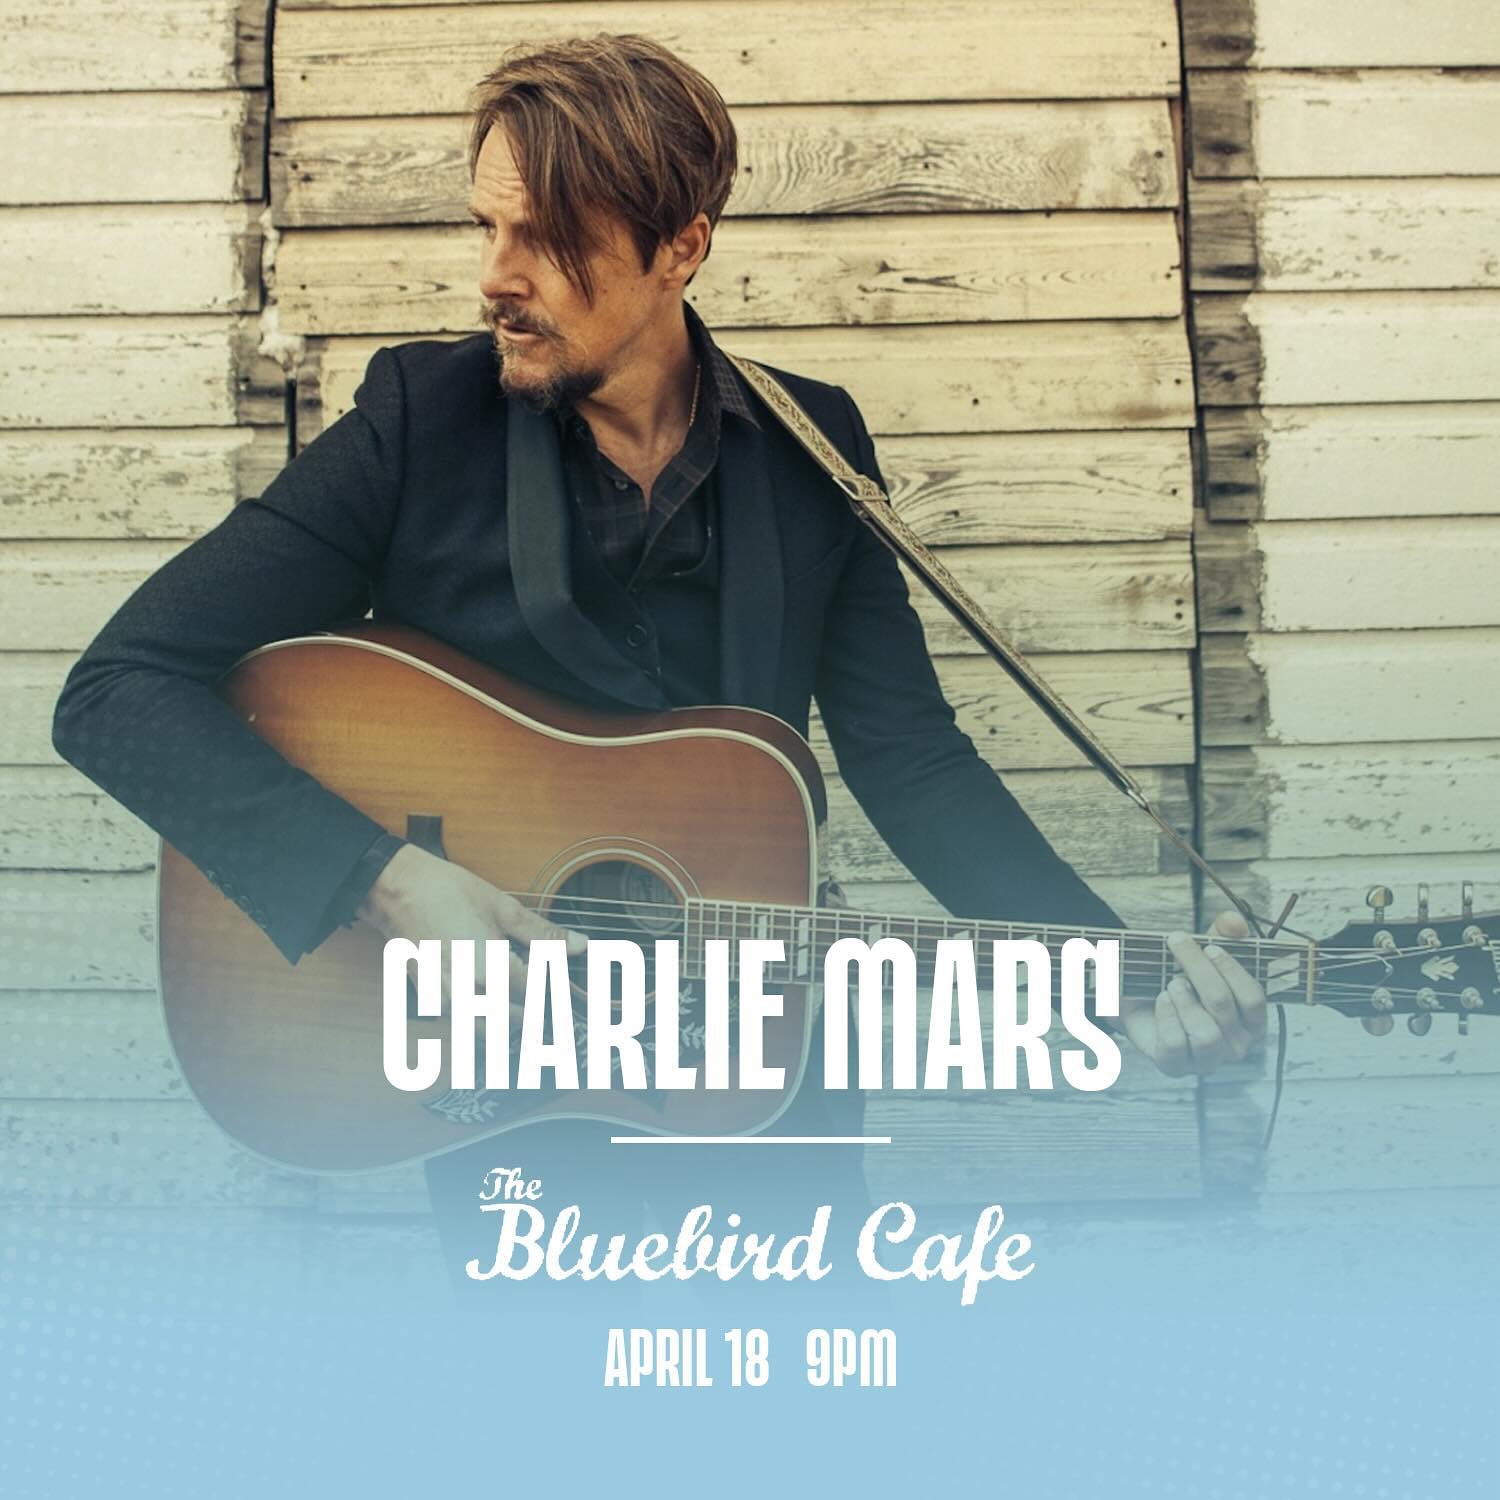 Known for his warm vocal croon and a knack for crafting poignant, earthy songs, Charlie Mars is bringing his country and